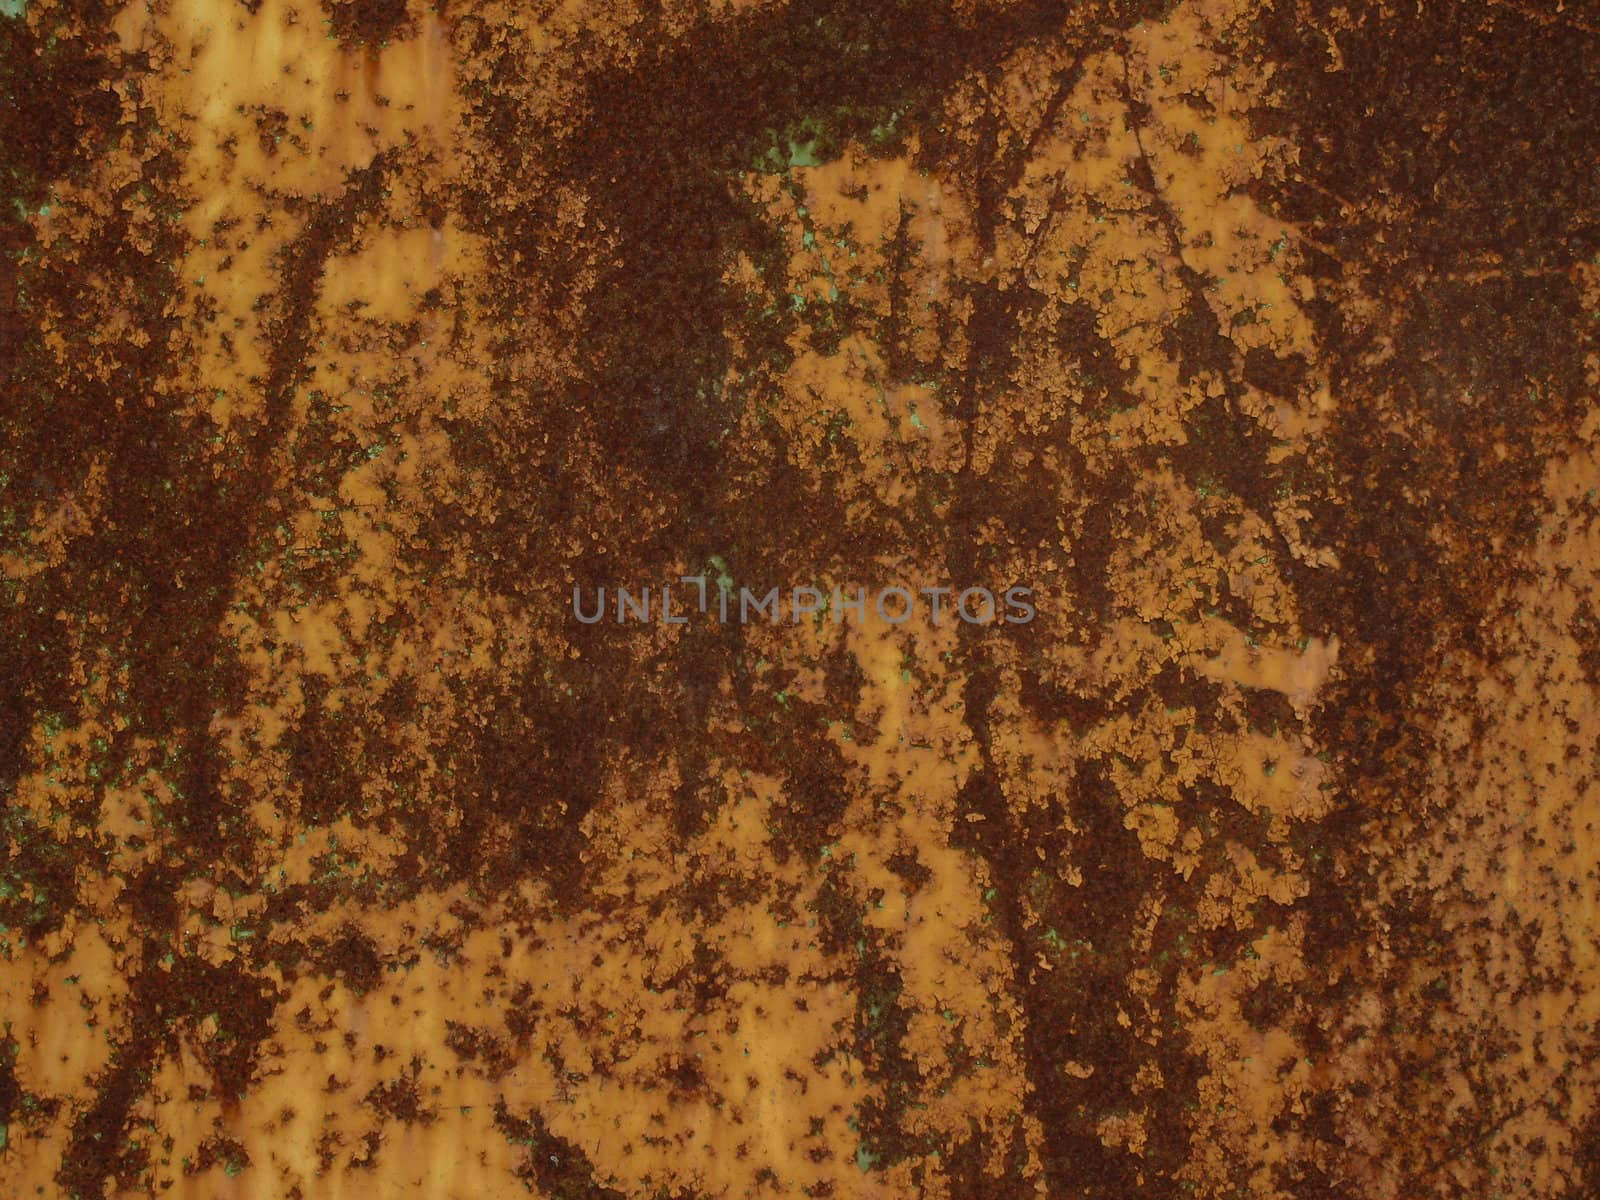 Rusty iron surface. May be used aas background or texture.